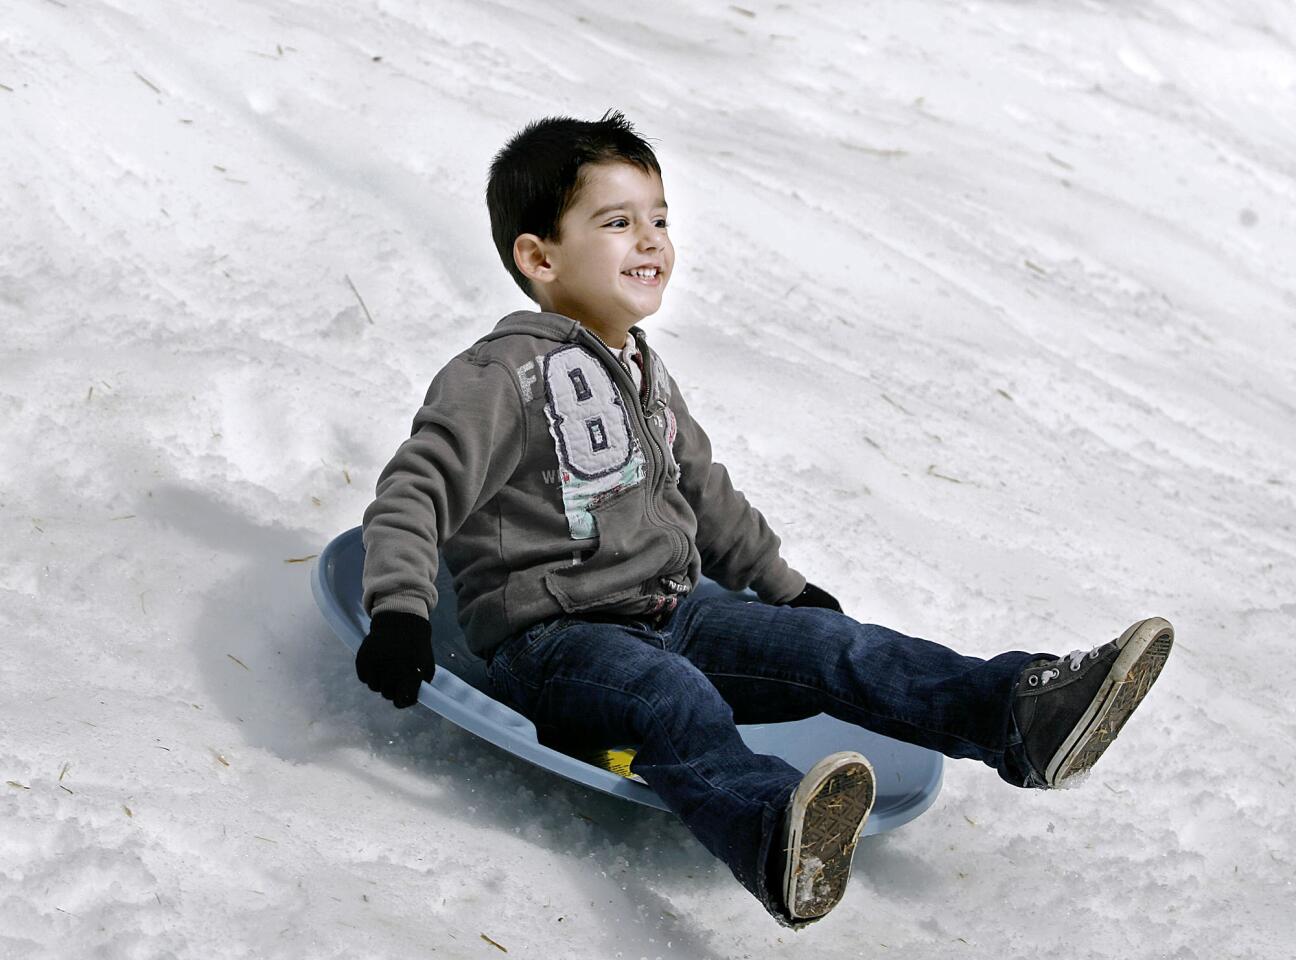 Alec Yeghikian, 3 of Glendale, grins from ear to ear as he slides all the way down a man-made snowbank during the St. Mary's Armenian Church Annual Winter Wonderland at the church's parking lot in Glendale on Saturday, January 26, 2013. The event was sponsored by the Armenian Relief Society of Western USA.